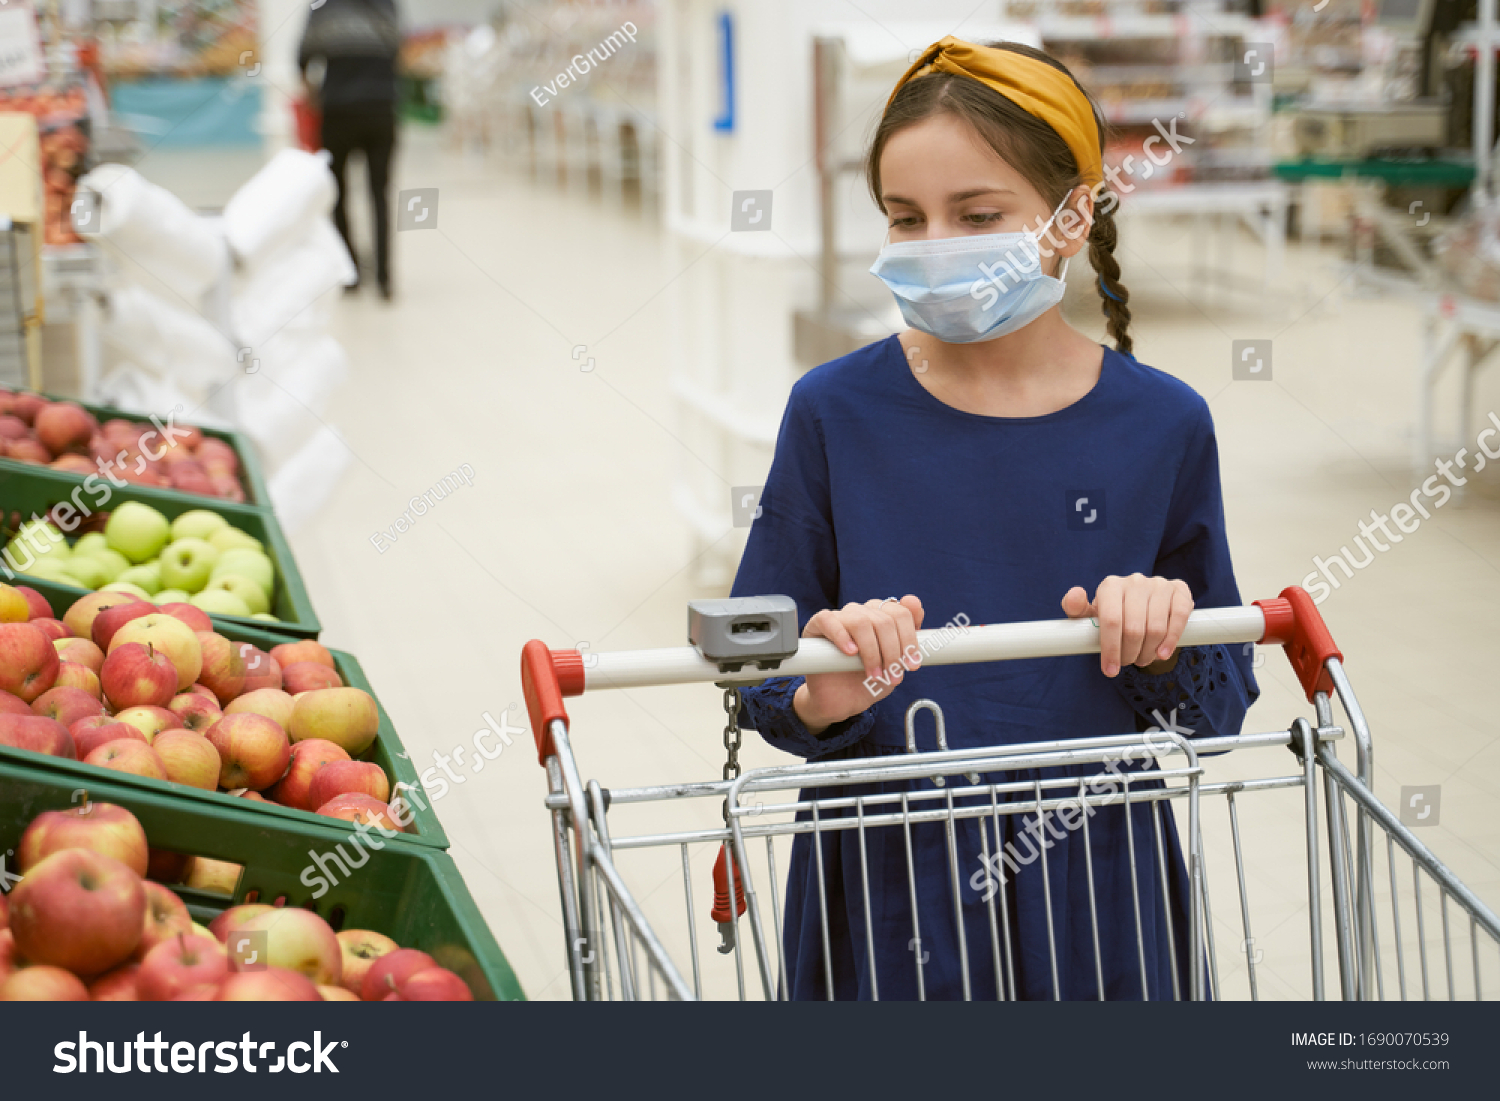 Girl in disposable medical mask shopping in supermarket during an outbreak of coronavirus pneumonia, makes panic stock of products. Empty store shelves, set of products for quarantine self-isolation #1690070539